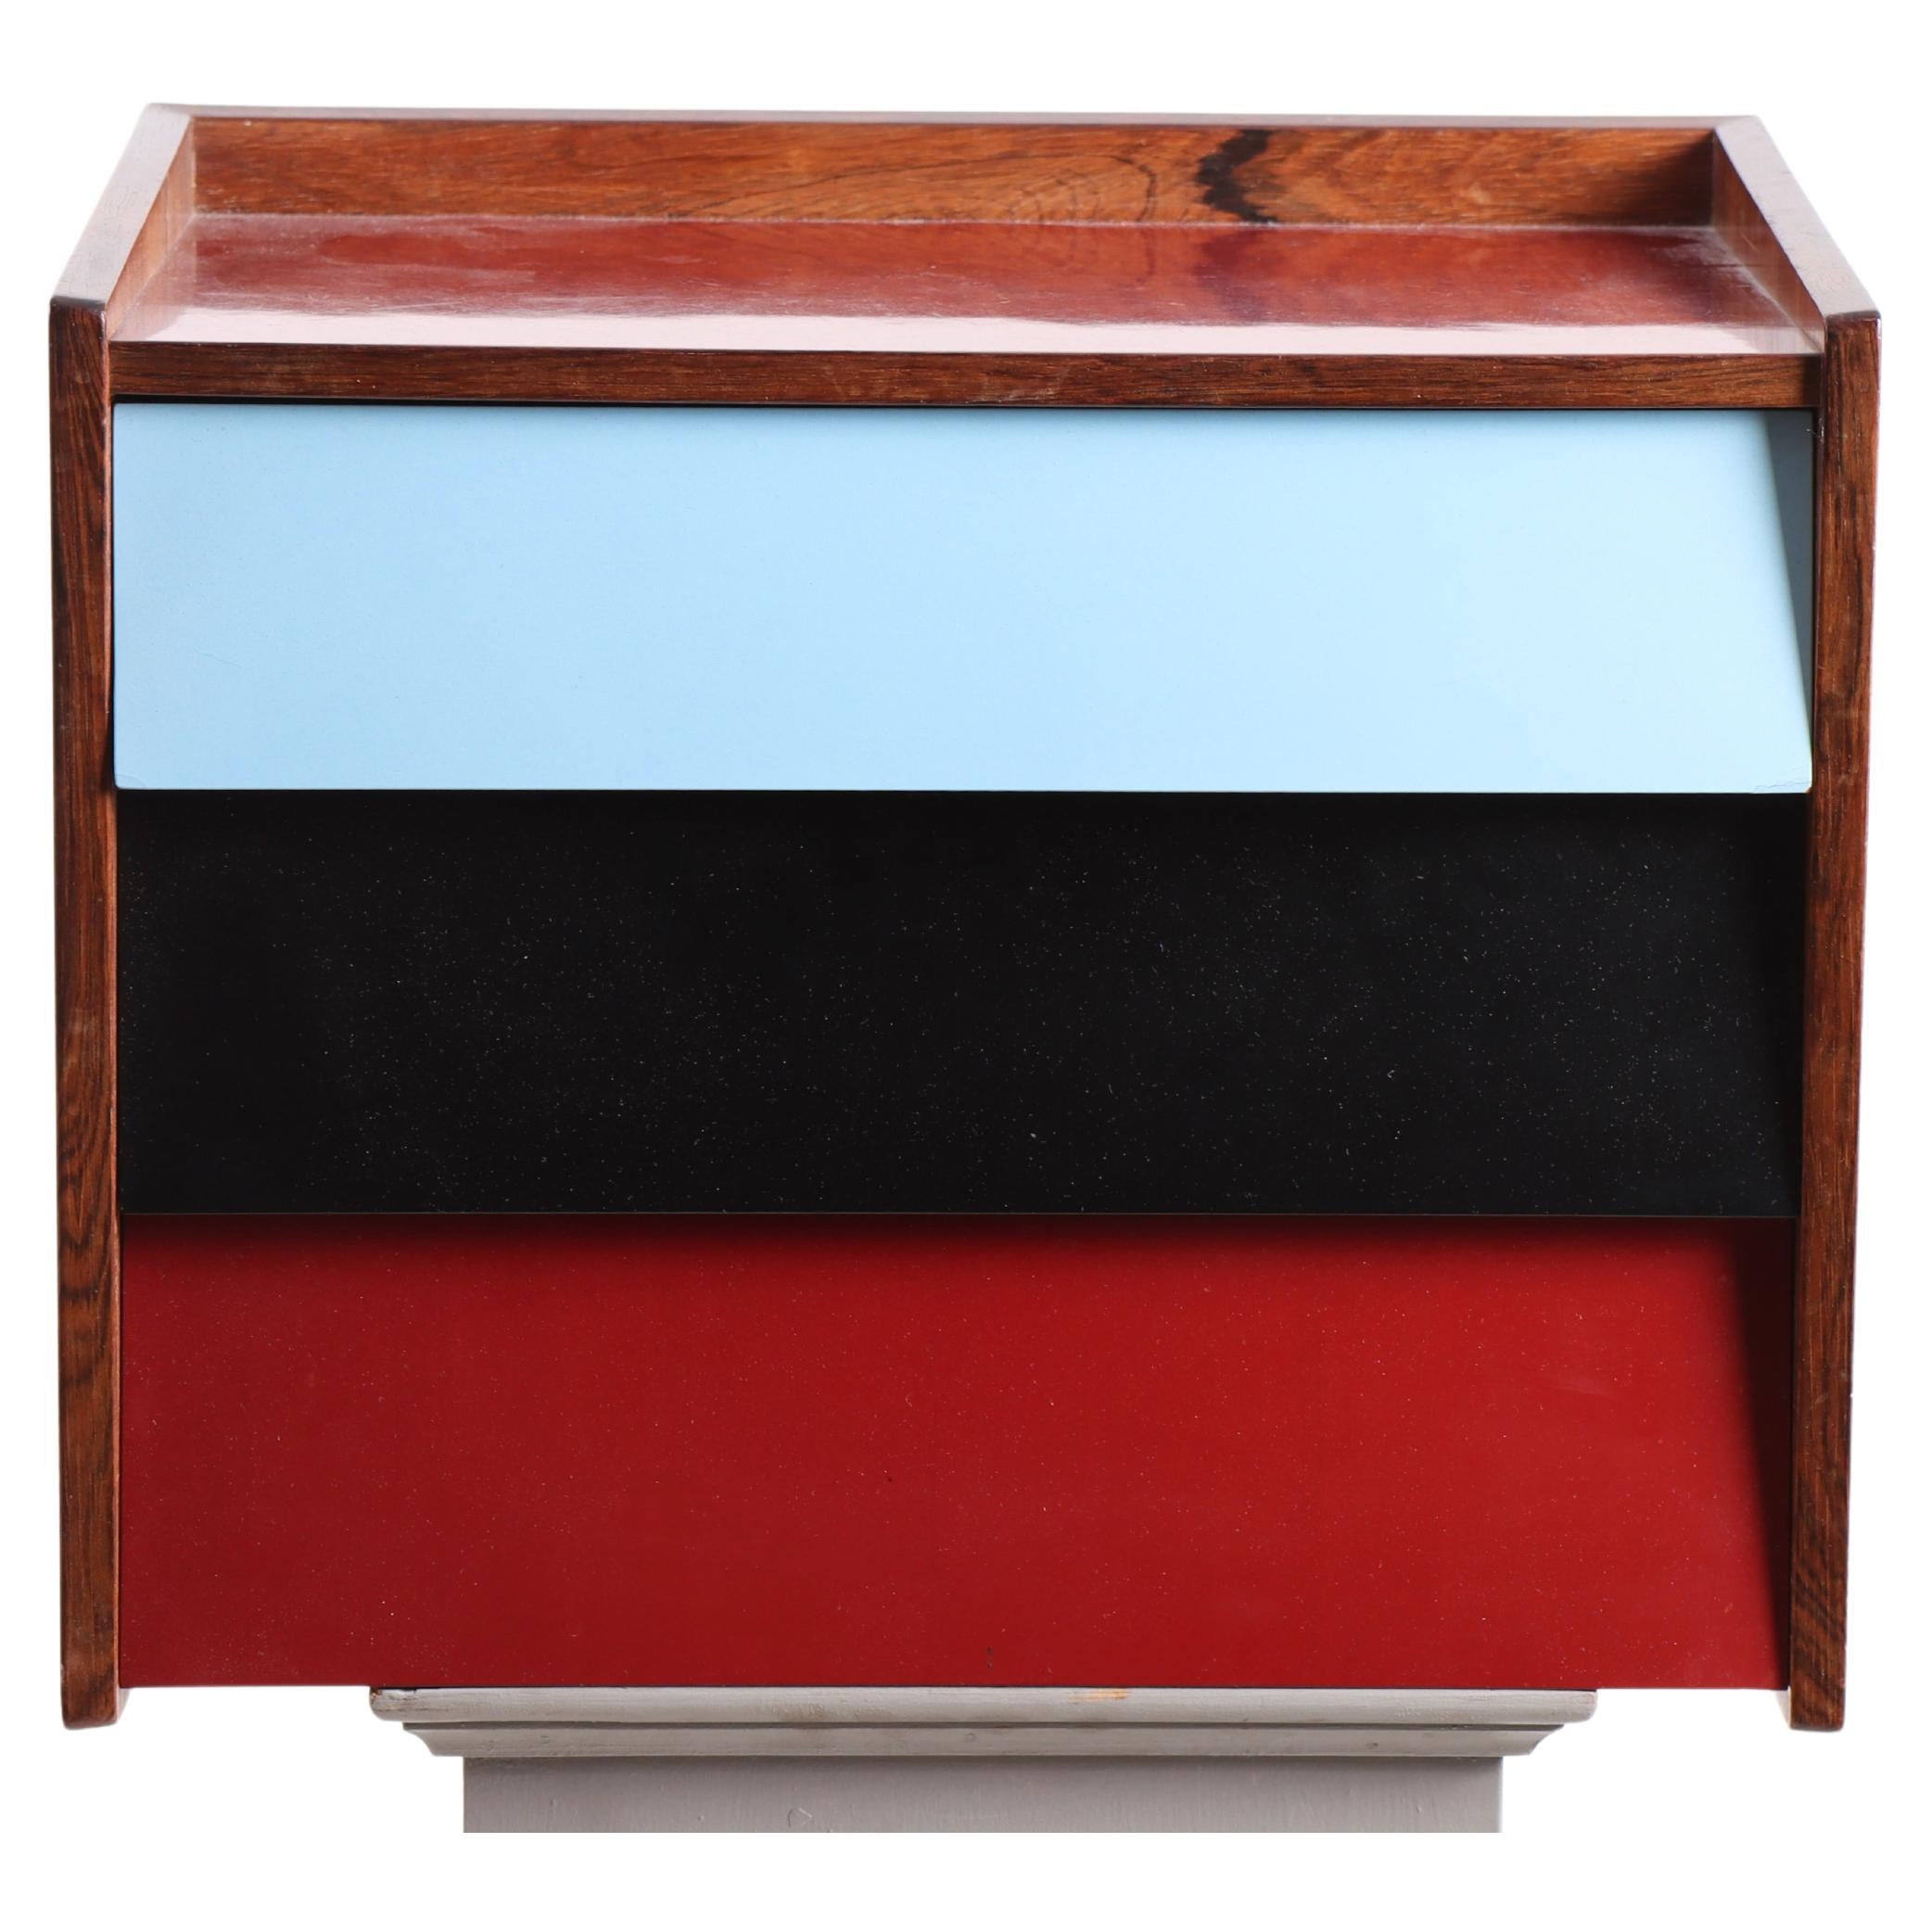 Midcentury Wall Mounted Commode in Rosewood, Danish Design, 1960s